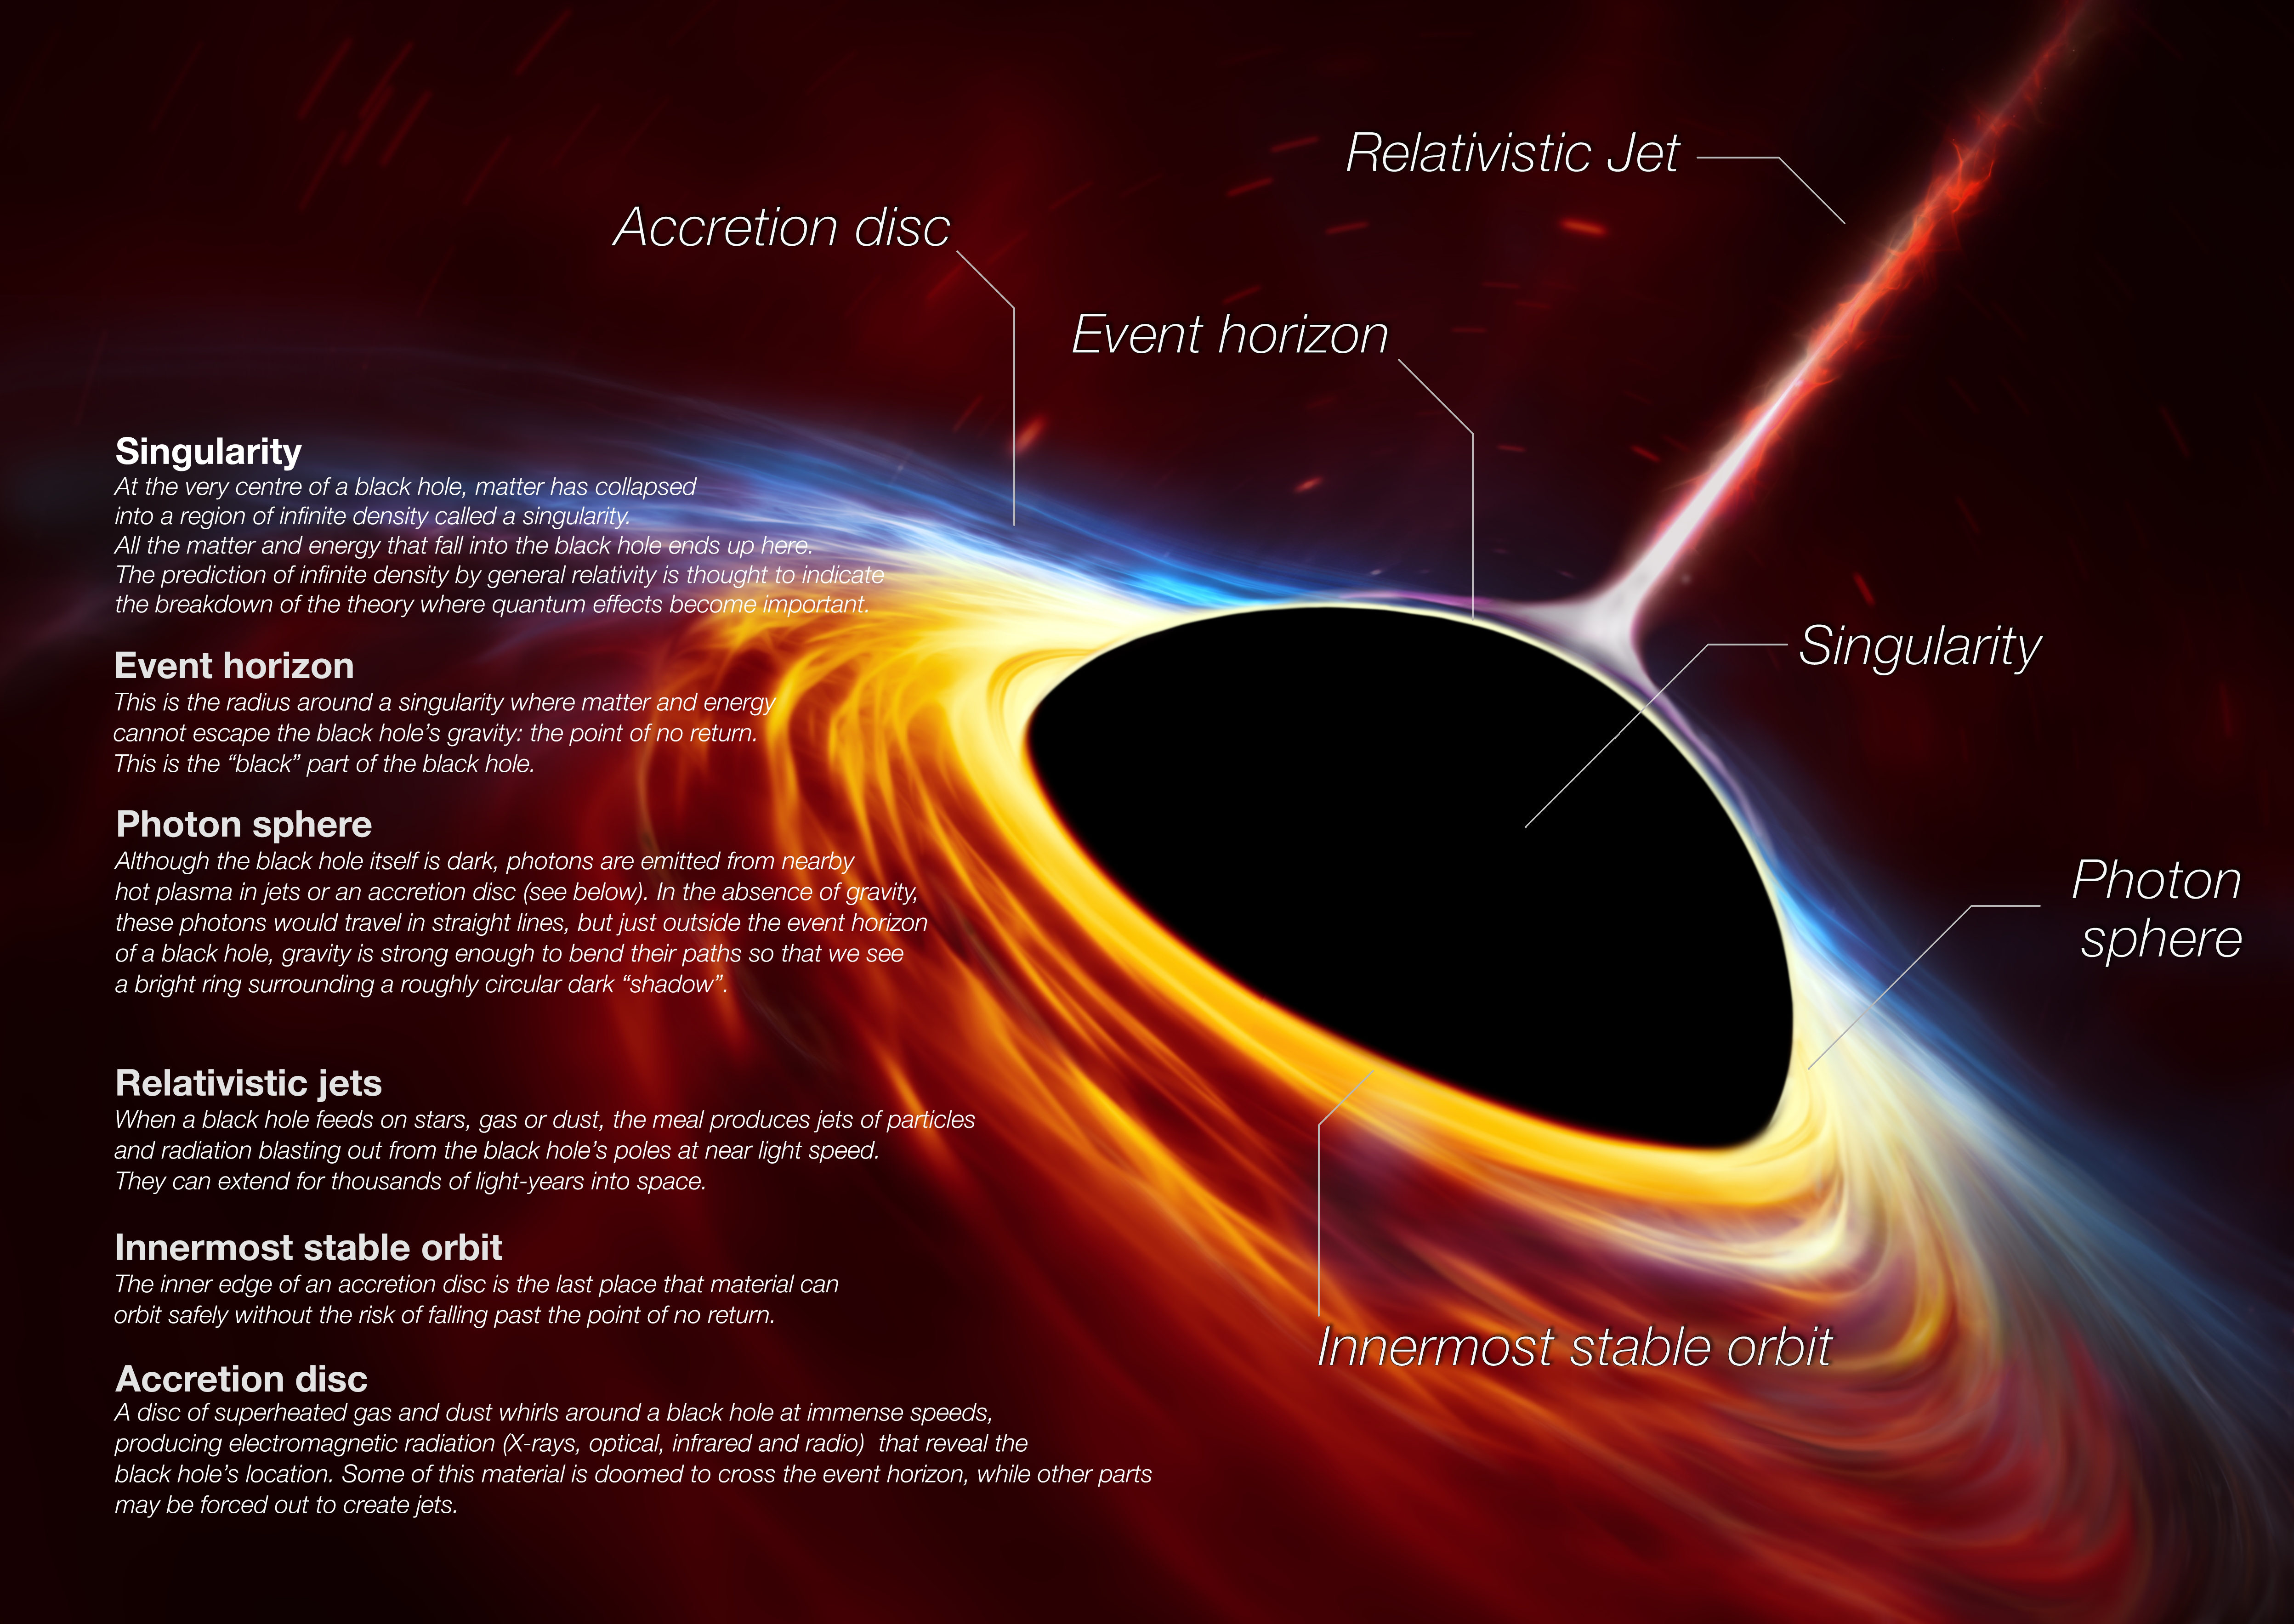 ESO's black hole anatomy diagram shows what a black hole looks like and labels the different components.